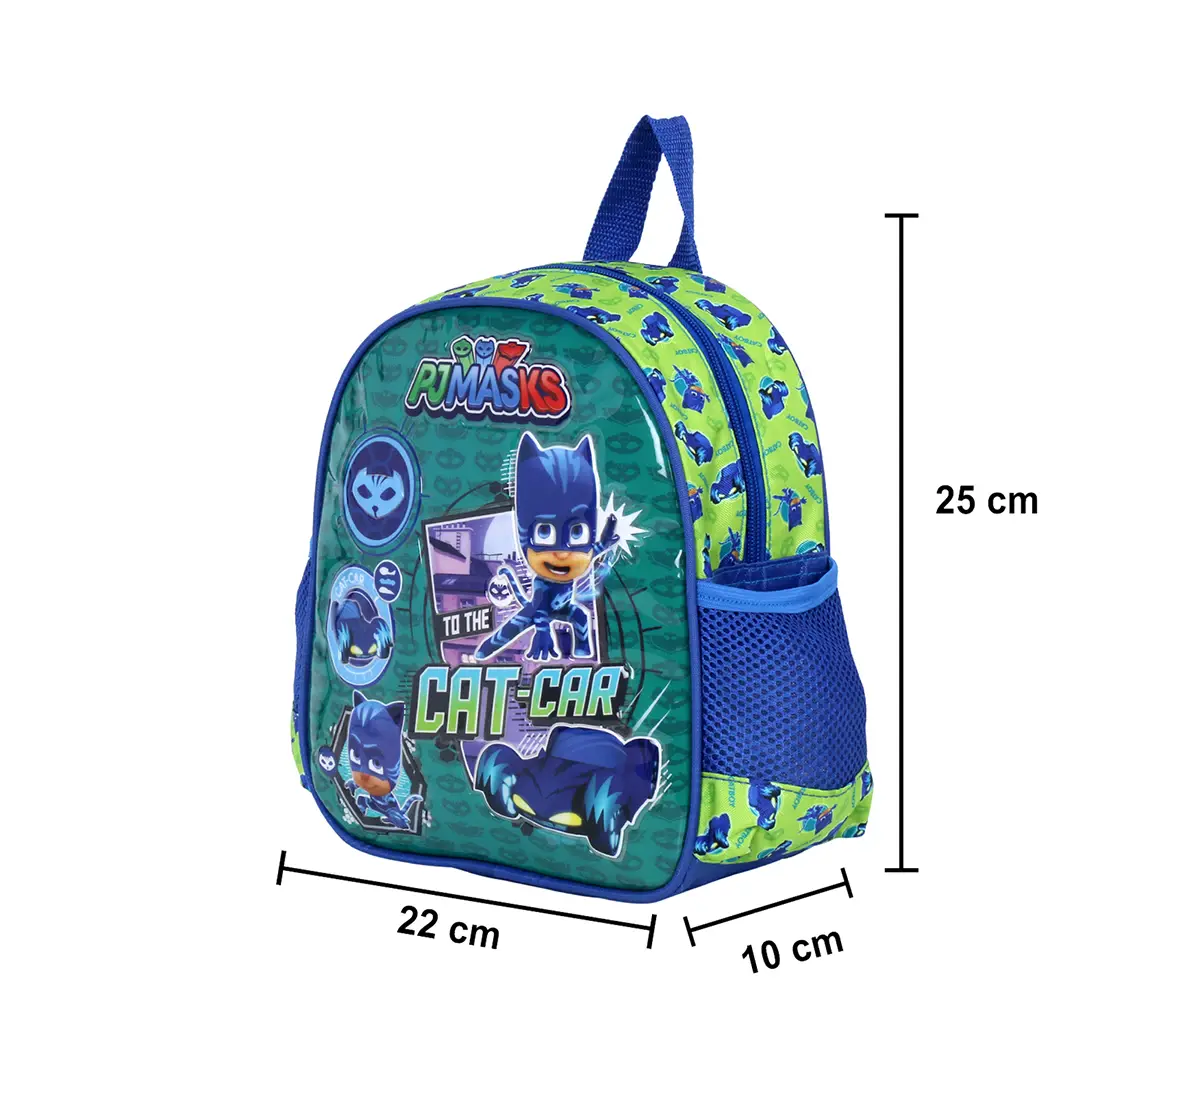  Pj Mask Cat Car 10 Backpack Bags for Kids age 3Y+ 